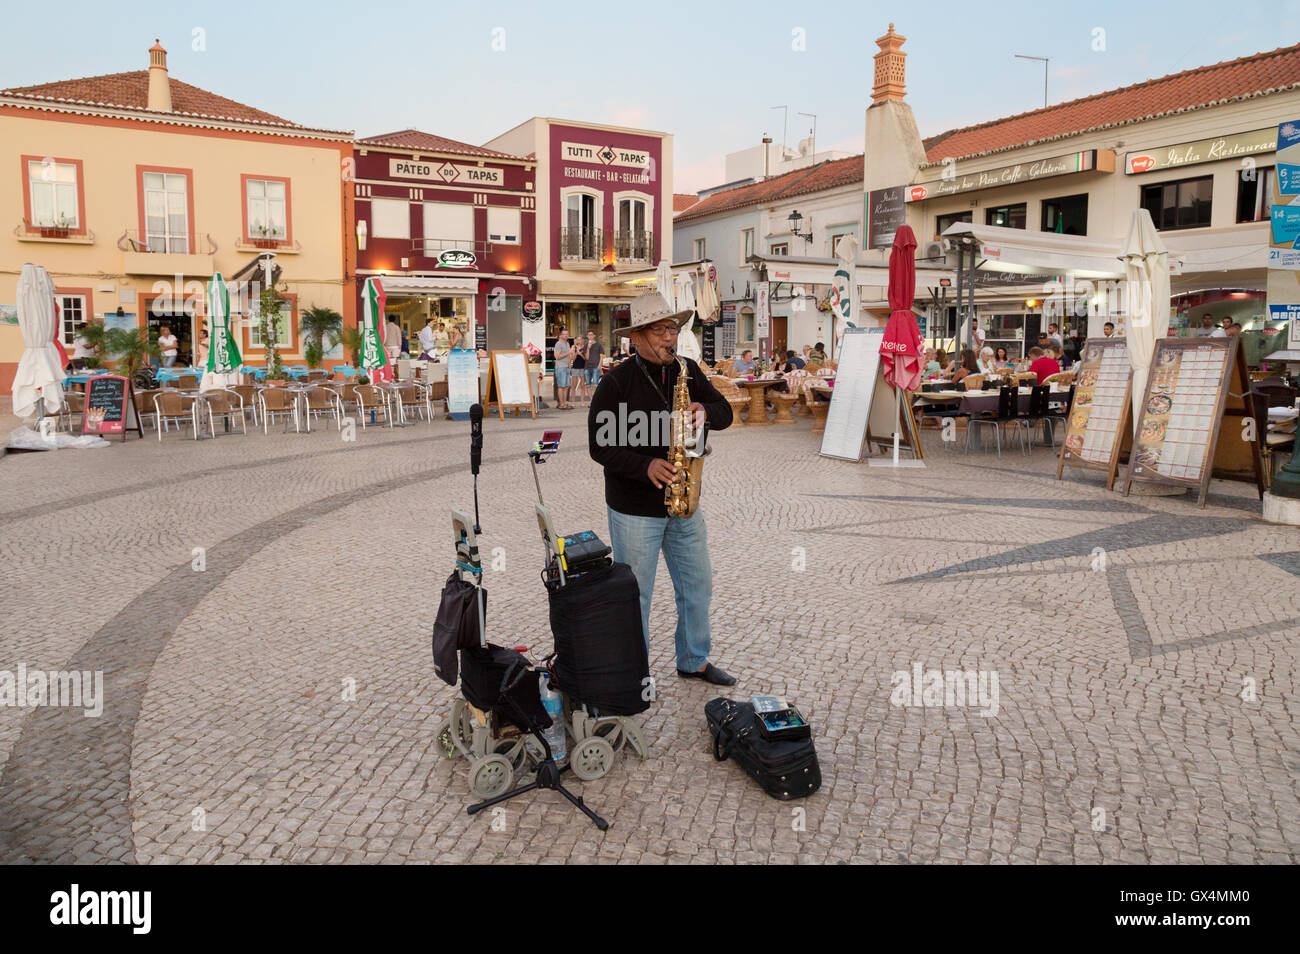 A busker playing the saxophone, Ferragudo main square, Algarve Portugal Europe Stock Photo